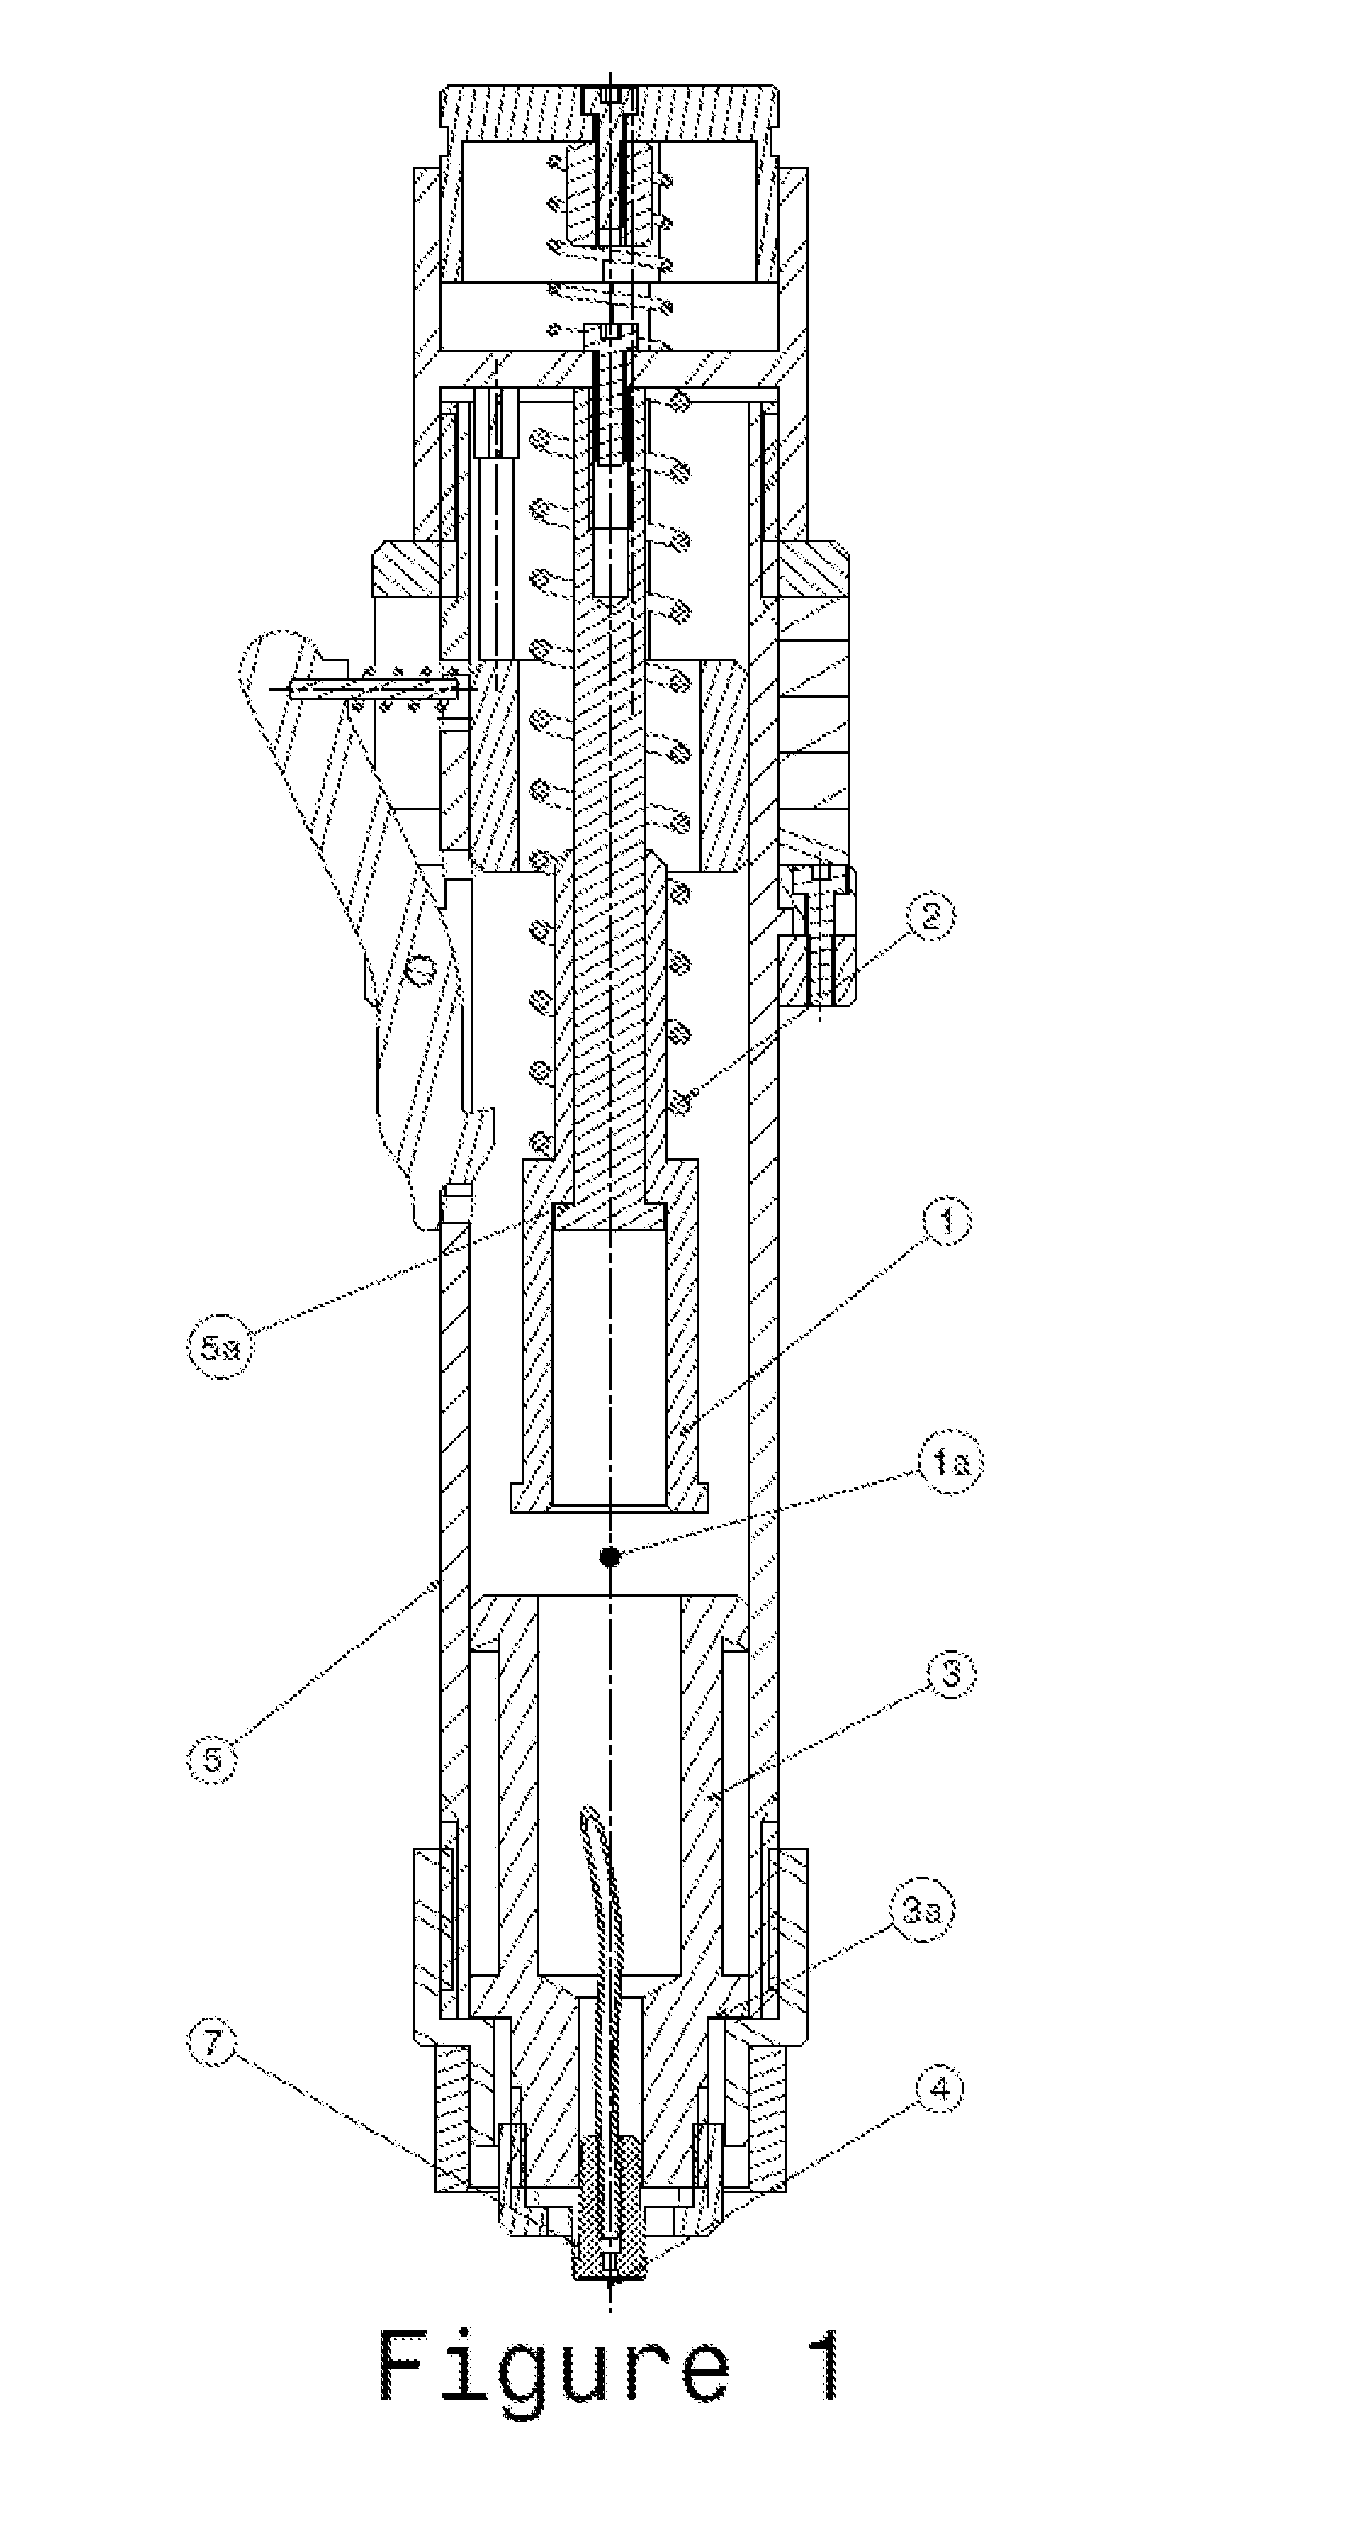 Method and device for inserting needles